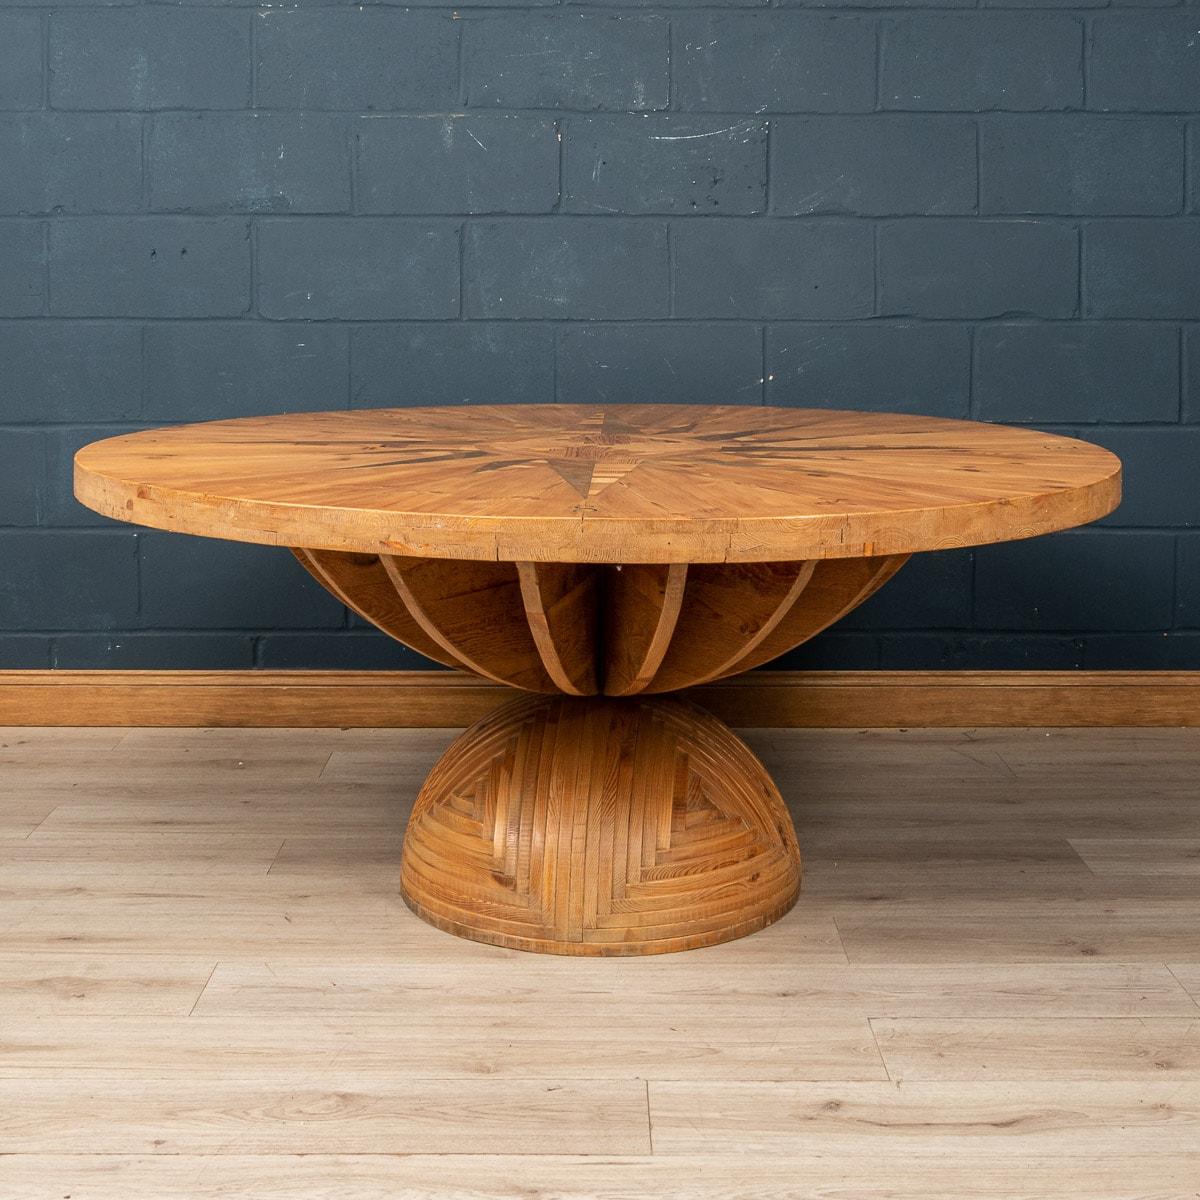 A stunning “Rosa Dei Venti“ table designed by Mario Ceroli and produced by Poltronova. The table is made from intersected pine segments with walnut and pine detailing and bronze inserts denoting the four compass points. This is one of the earliest